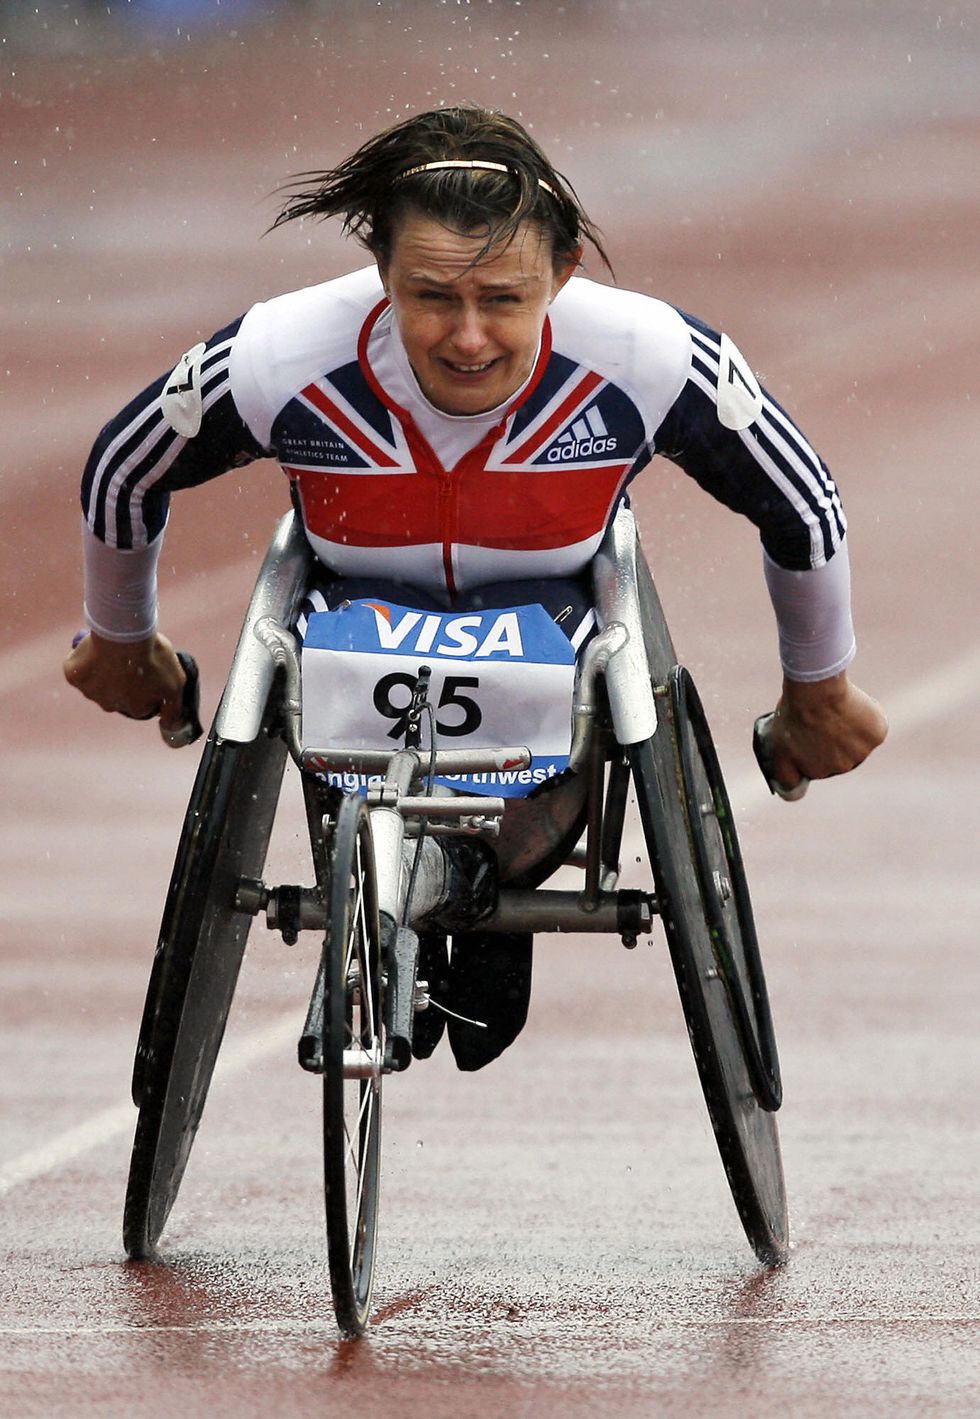 Tire, Wheelchair sports, Disabled sports, Sports, Individual sports, Championship, Wheelchair, Bicycle wheel, Athlete, Playing sports, 